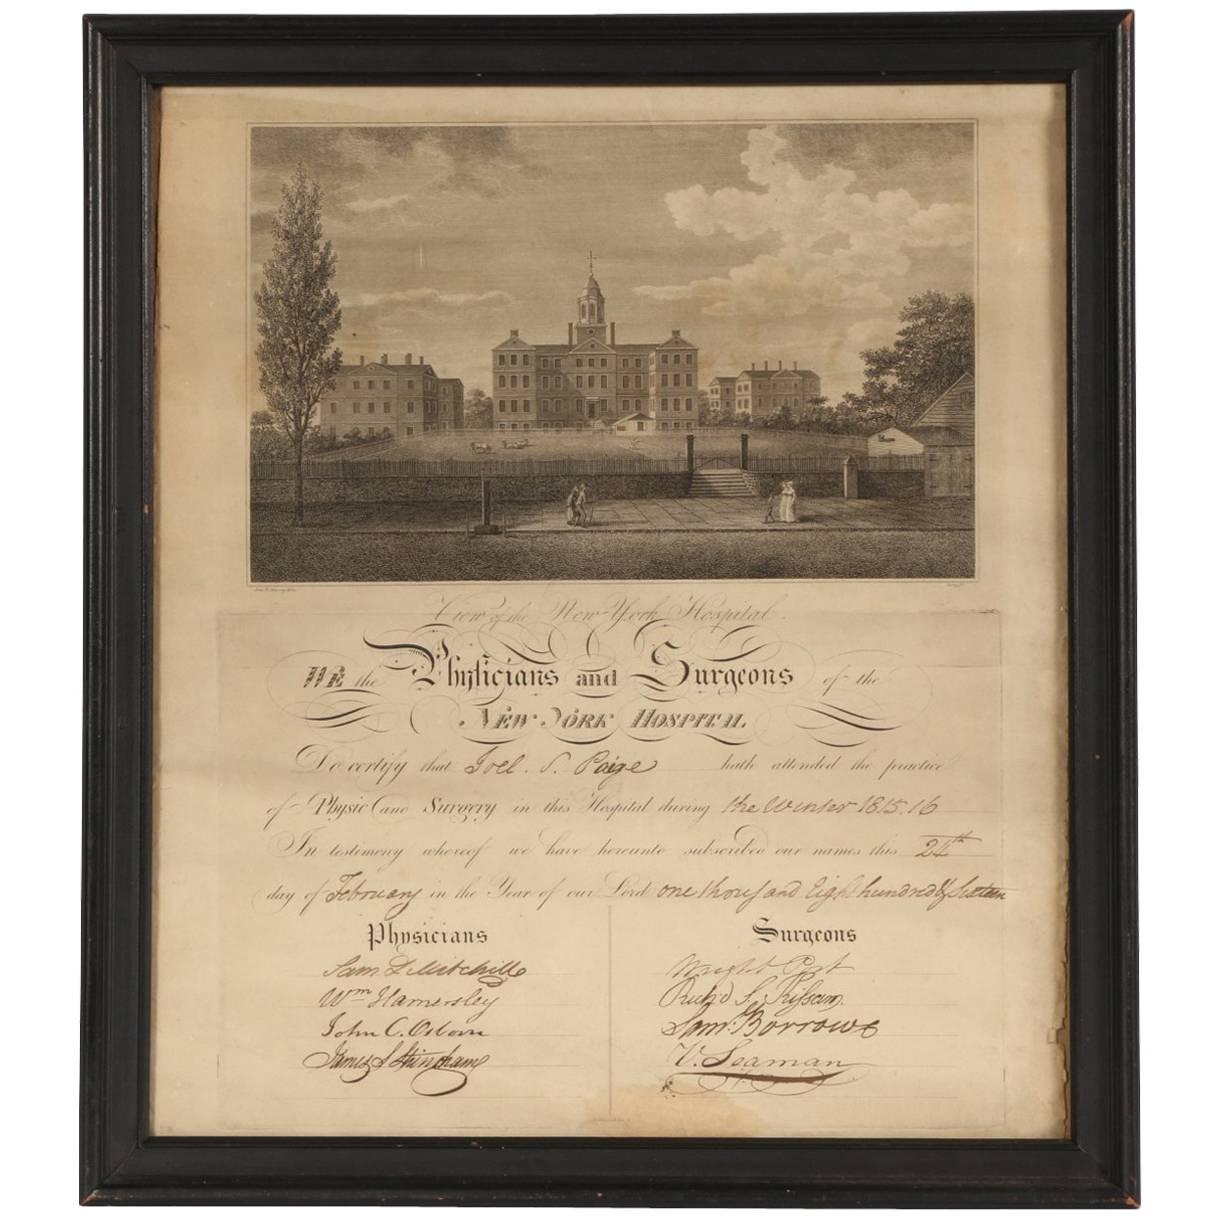 Early 19th Century Medical Document from New York Hospital with Engraving